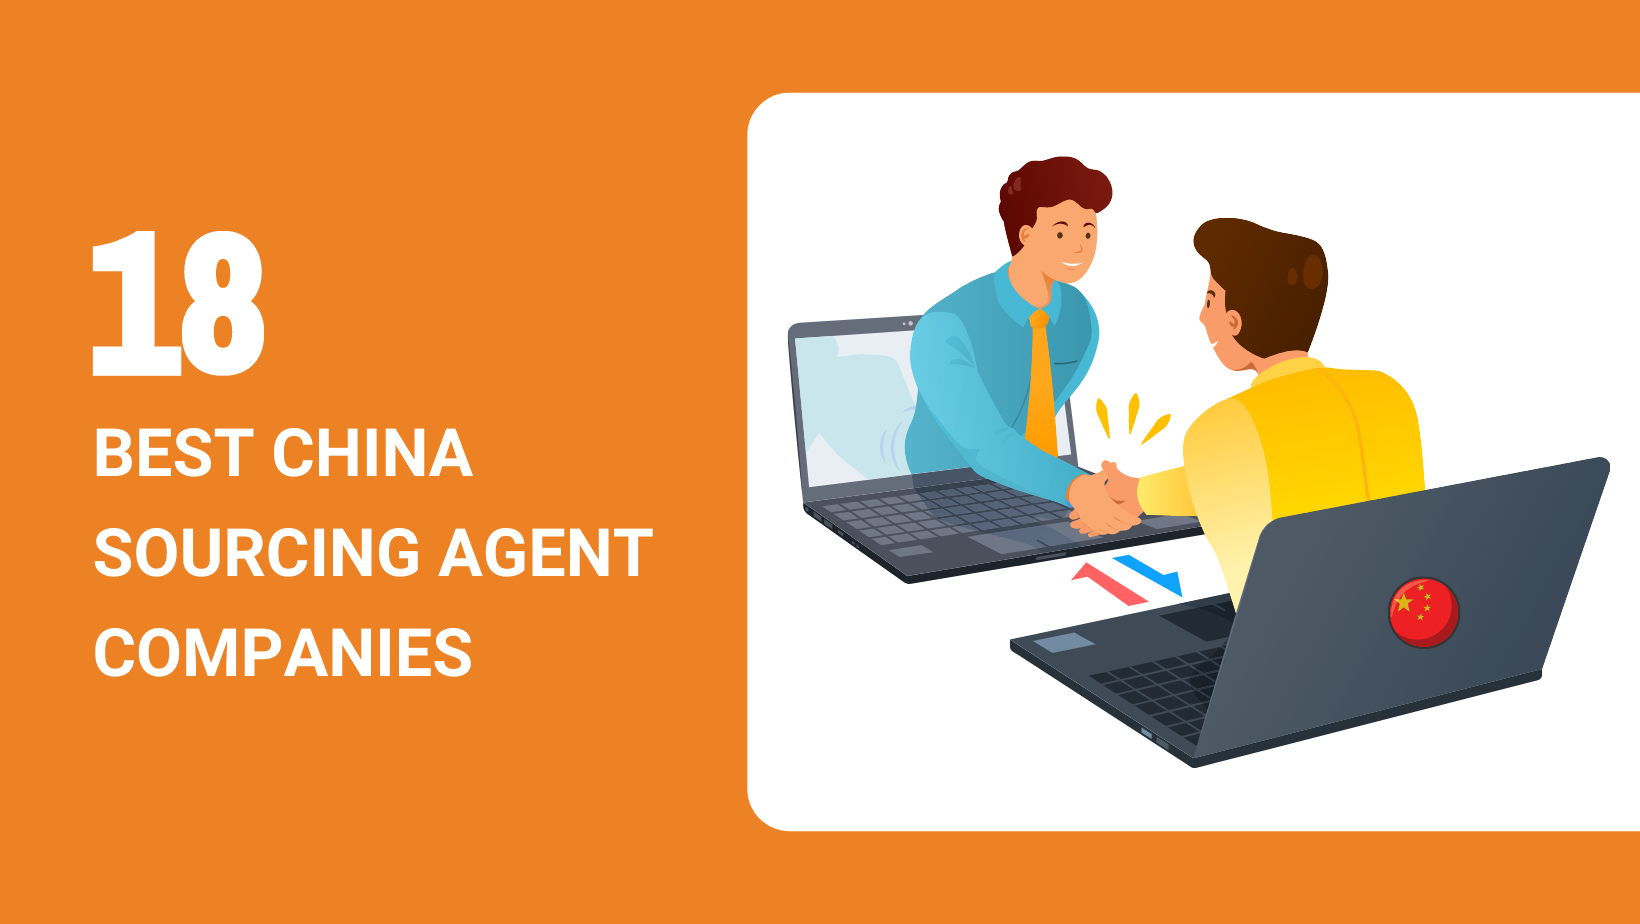 18 BEST CHINA SOURCING AGENT COMPANIES